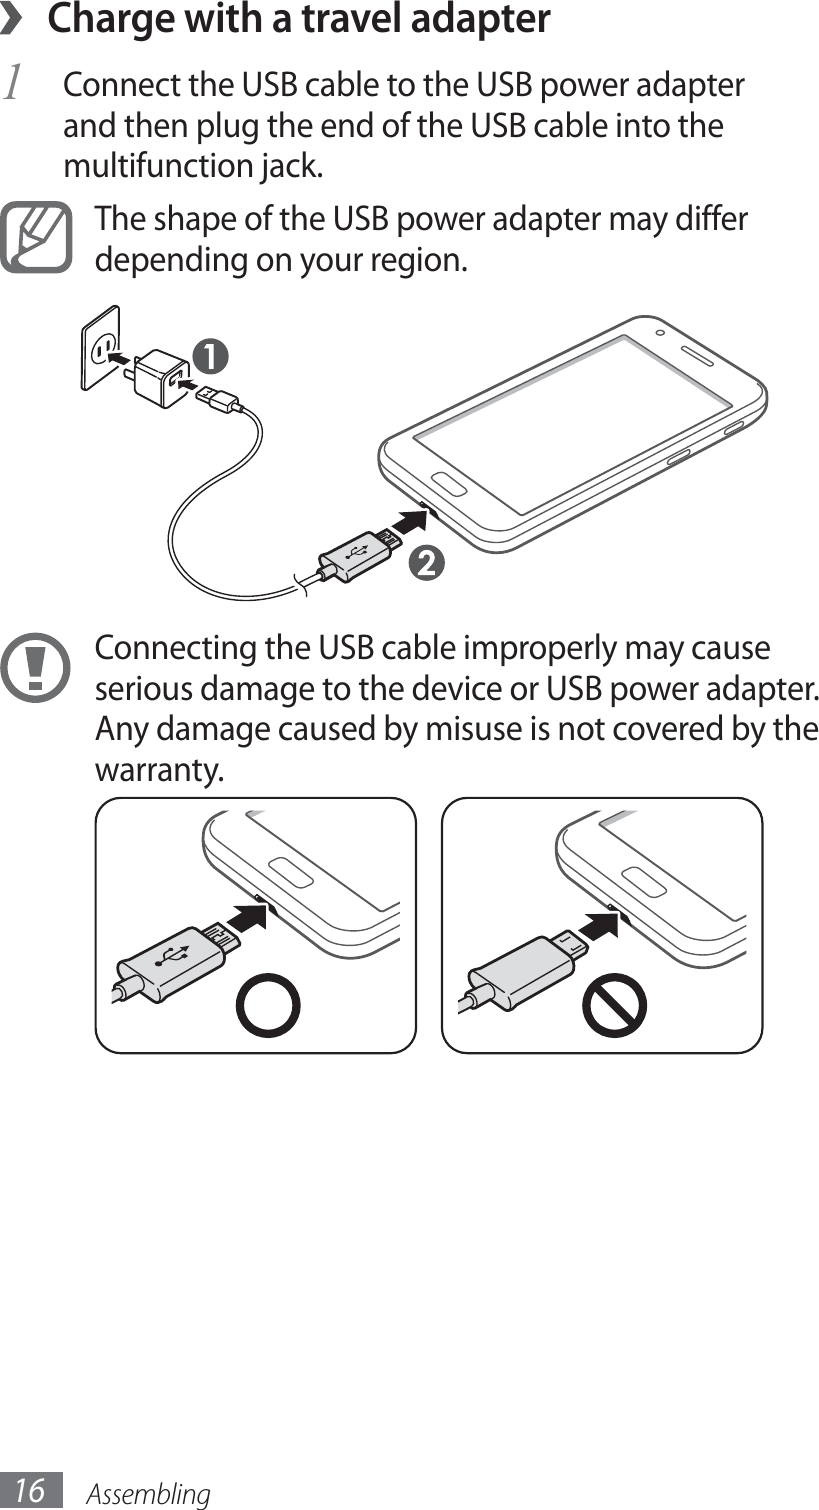 Assembling16Charge with a travel adapter ›Connect the USB cable to the USB power adapter 1 and then plug the end of the USB cable into the multifunction jack.The shape of the USB power adapter may differ depending on your region.Connecting the USB cable improperly may cause serious damage to the device or USB power adapter. Any damage caused by misuse is not covered by the warranty.